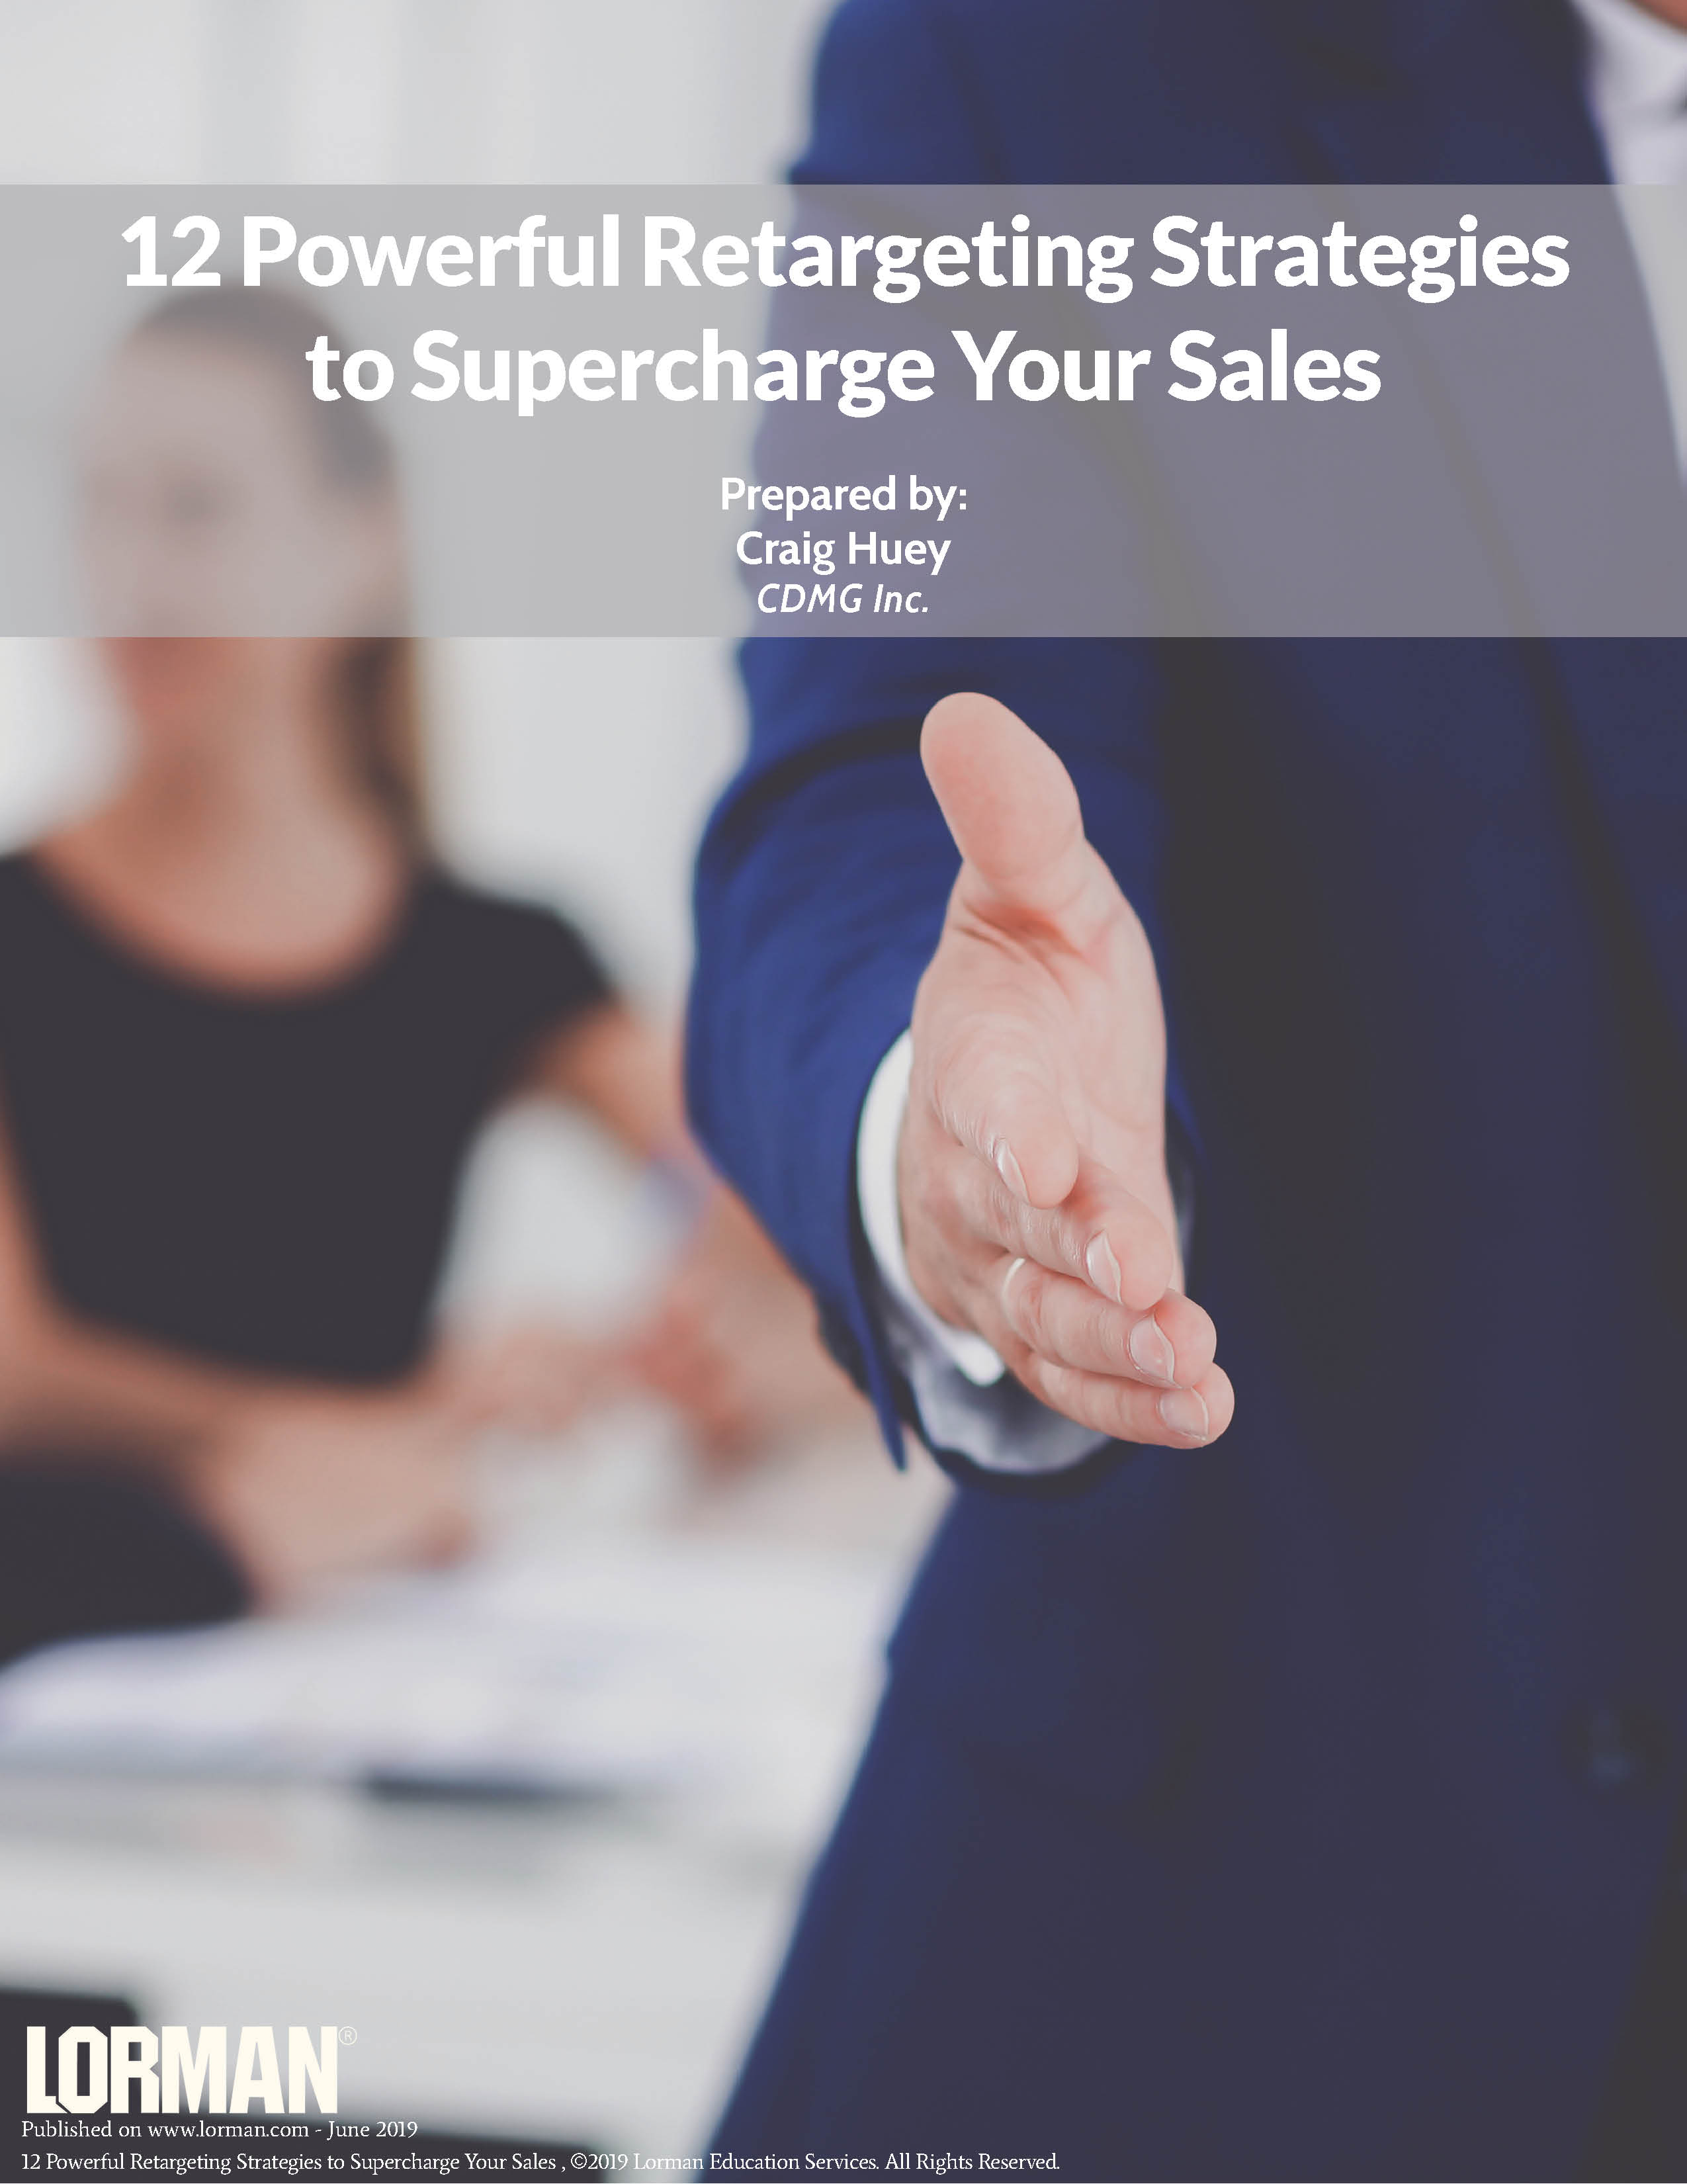 12 Powerful Retargeting Strategies to Supercharge Your Sales